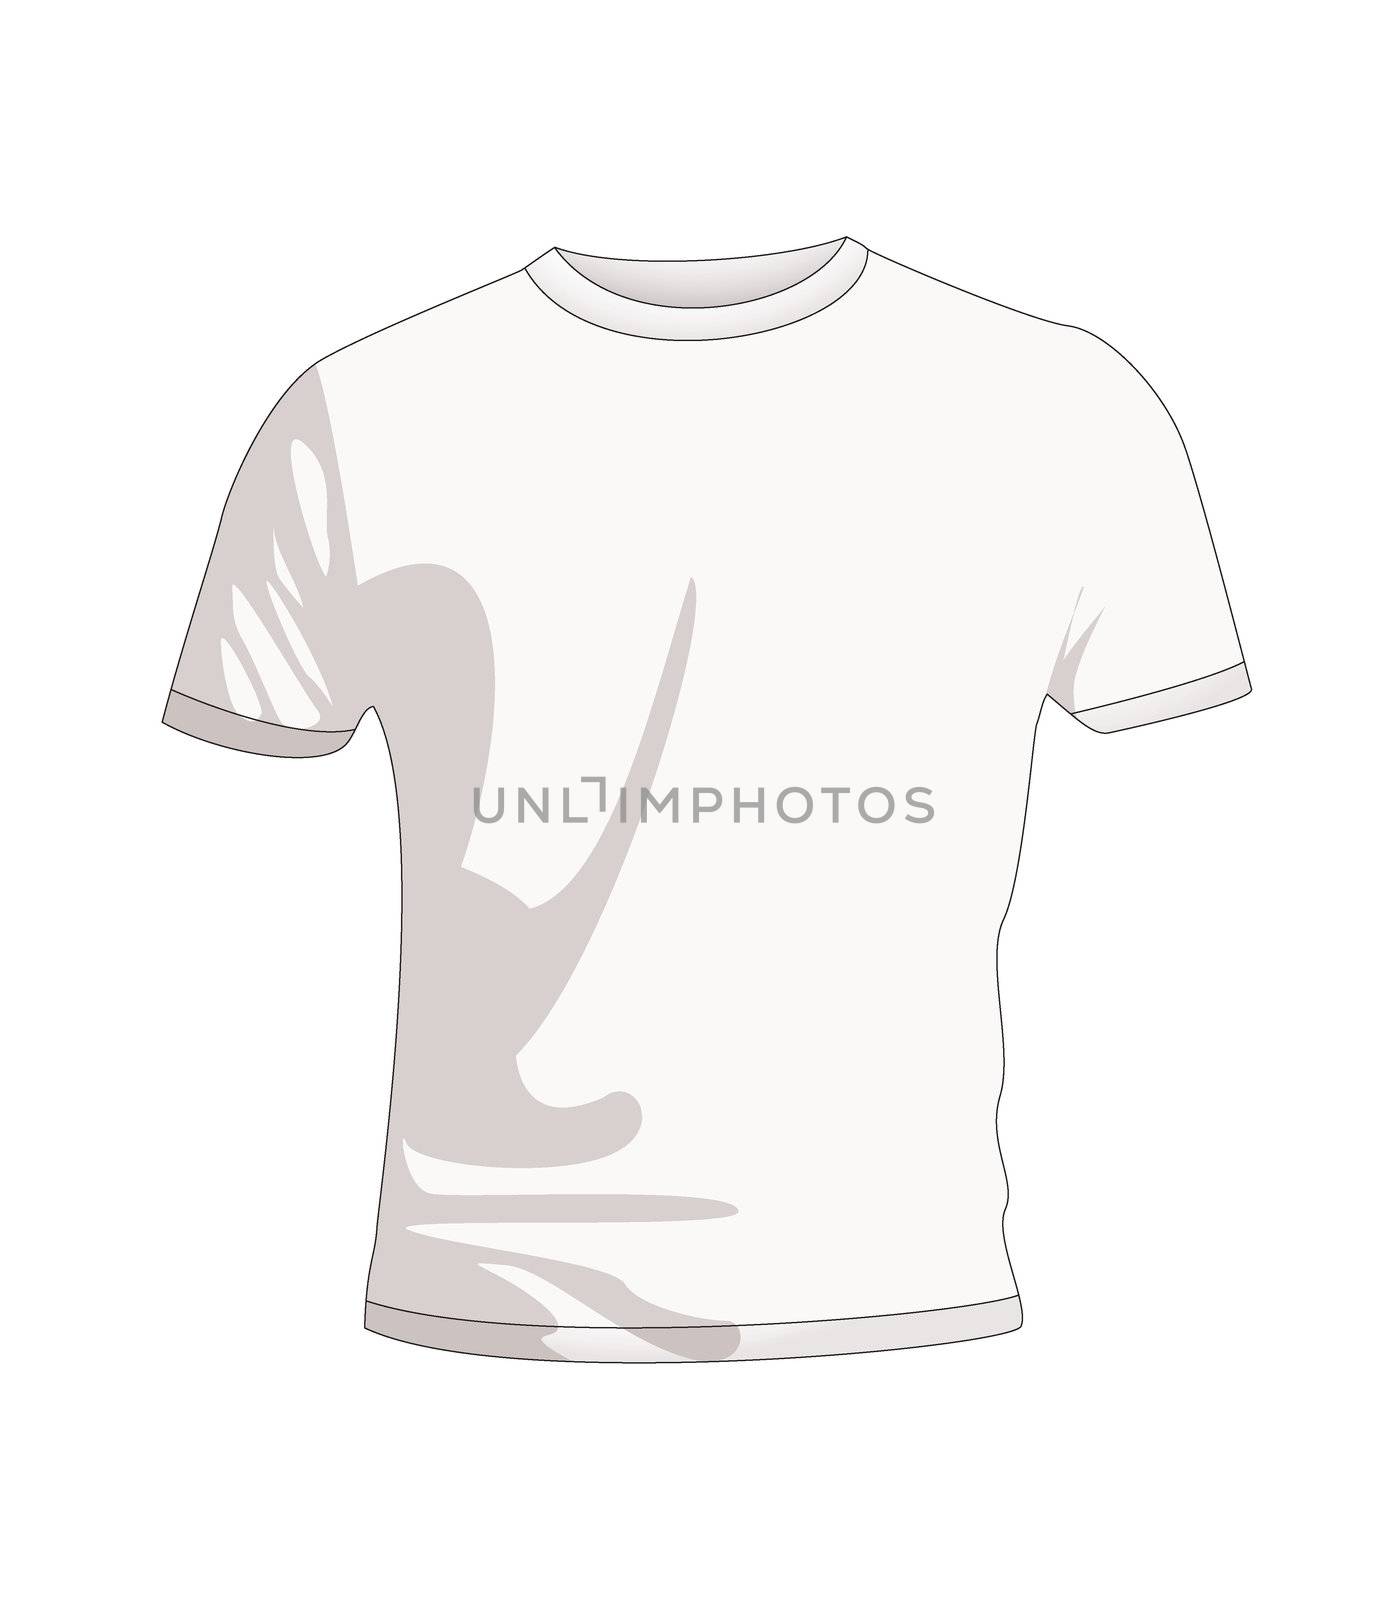 Plain white t shirt for man or boy with room for text